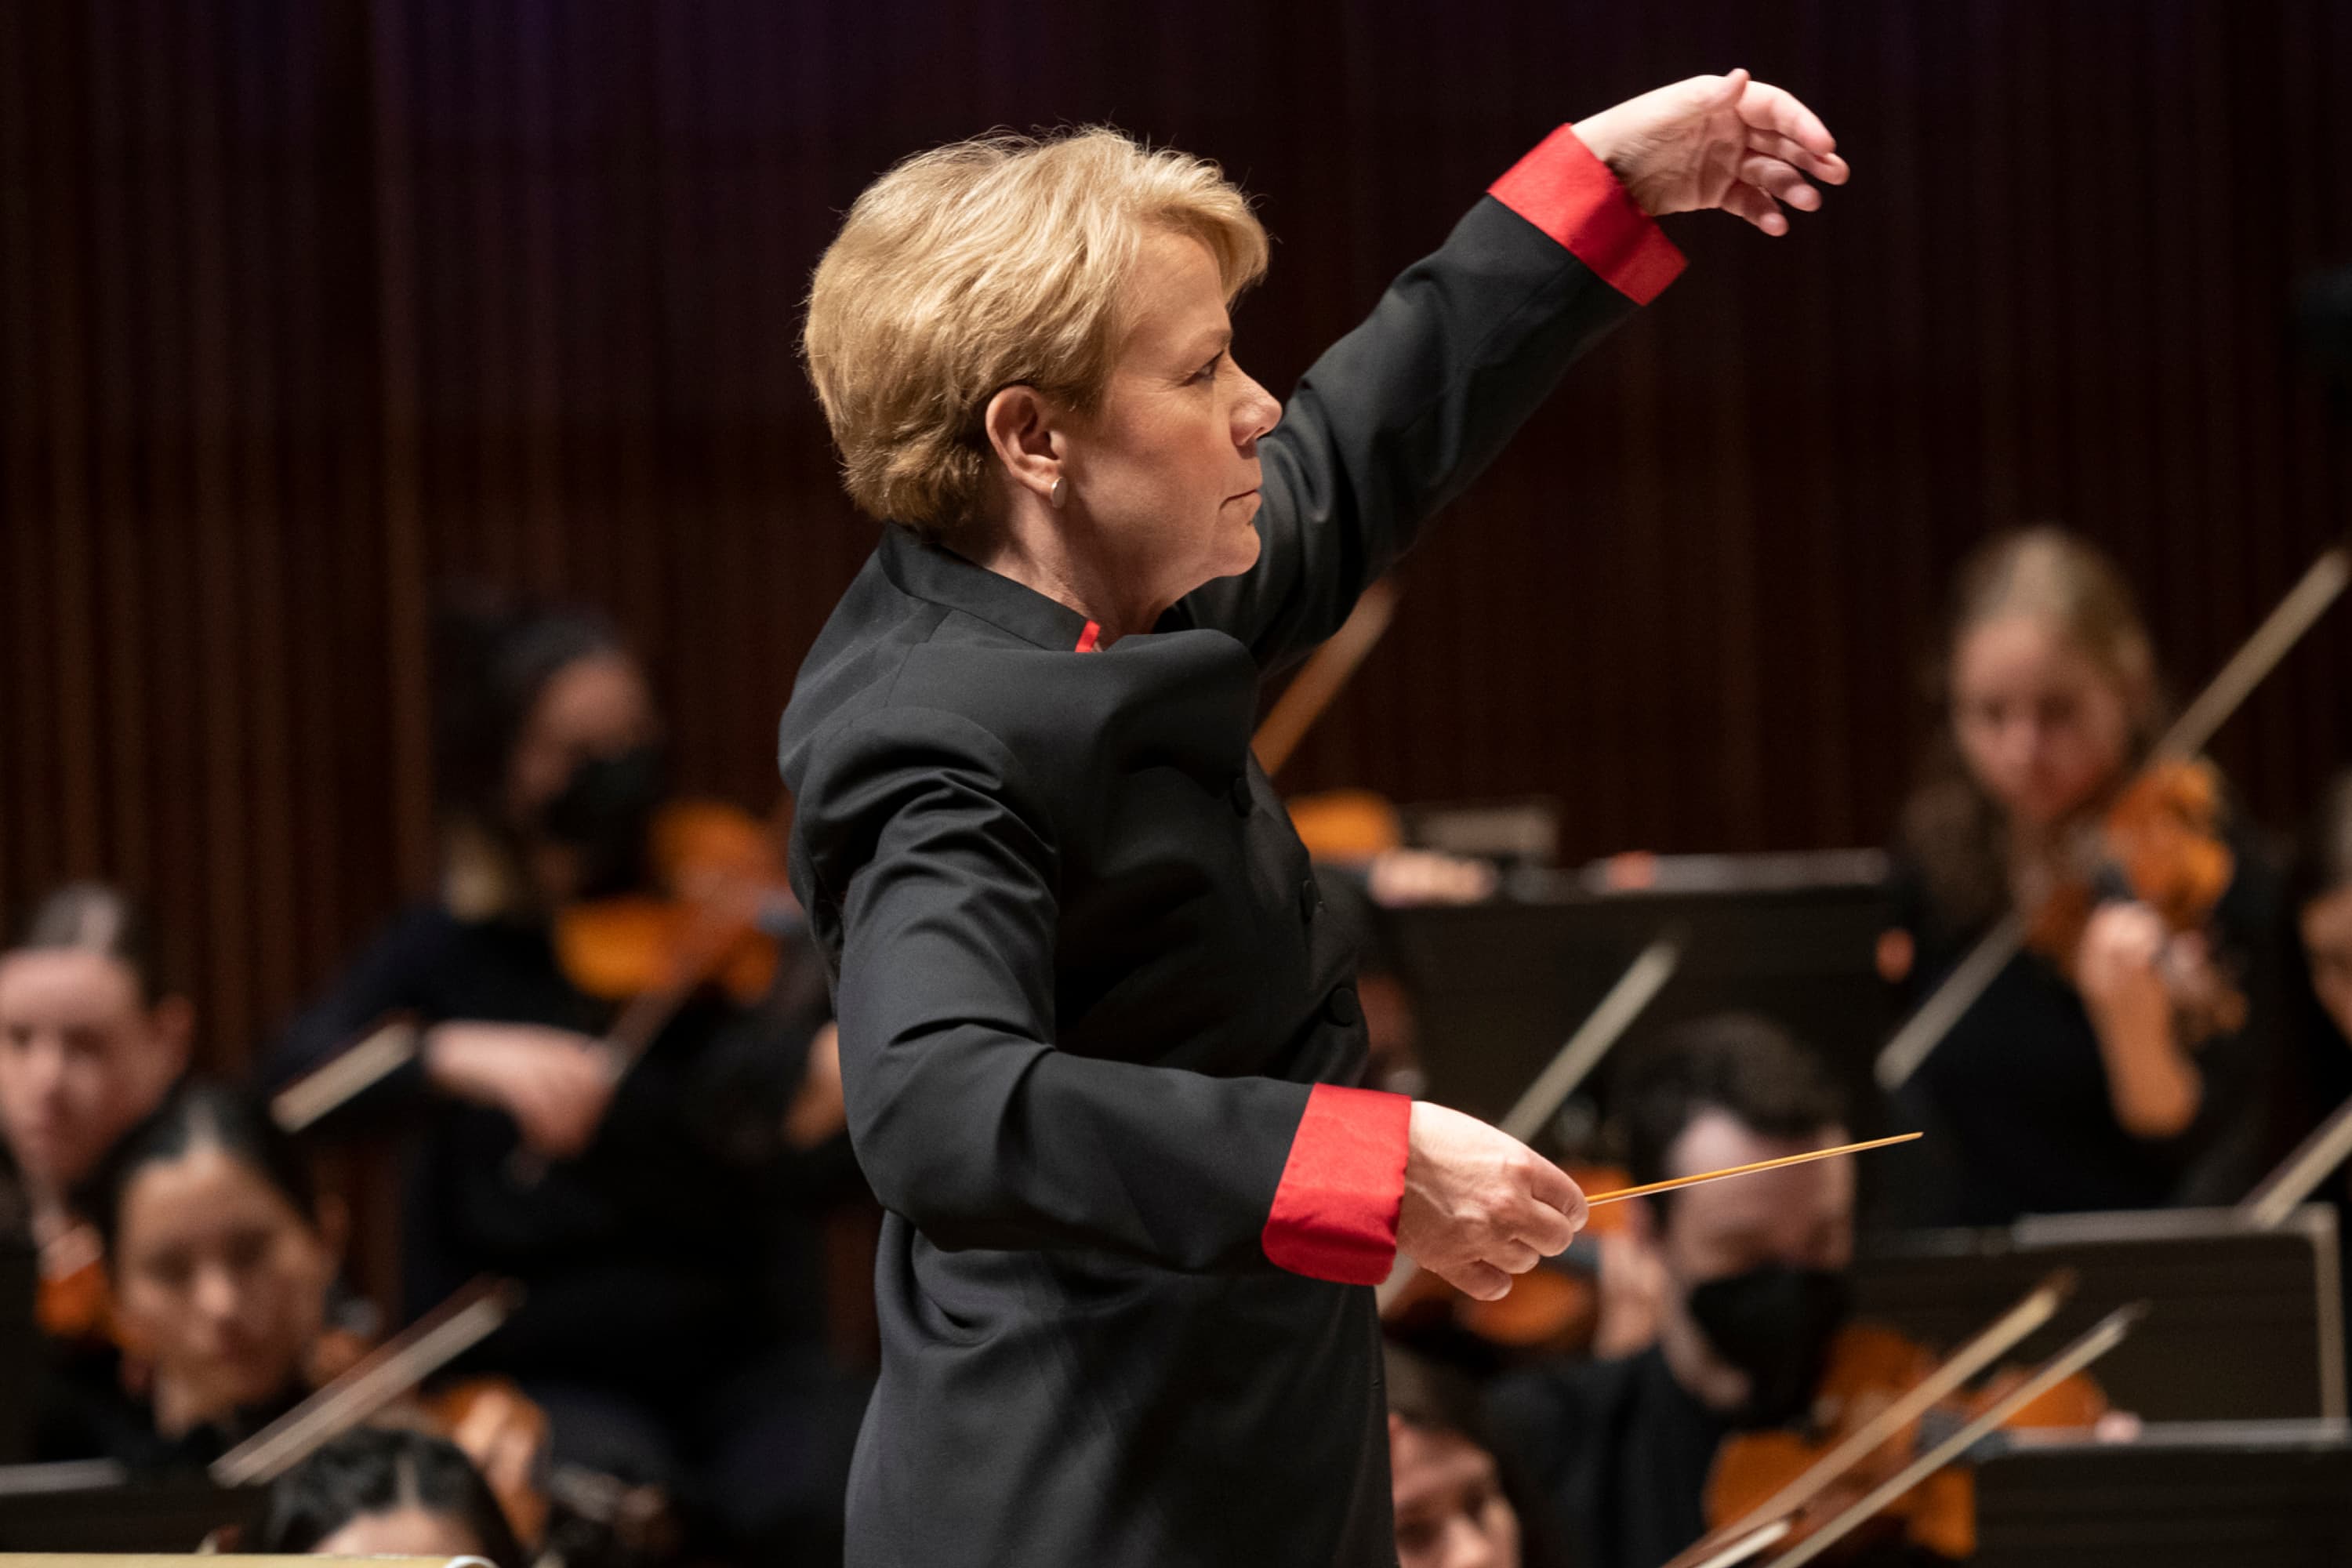 Marin Alsop conducts an orchestra on stage.